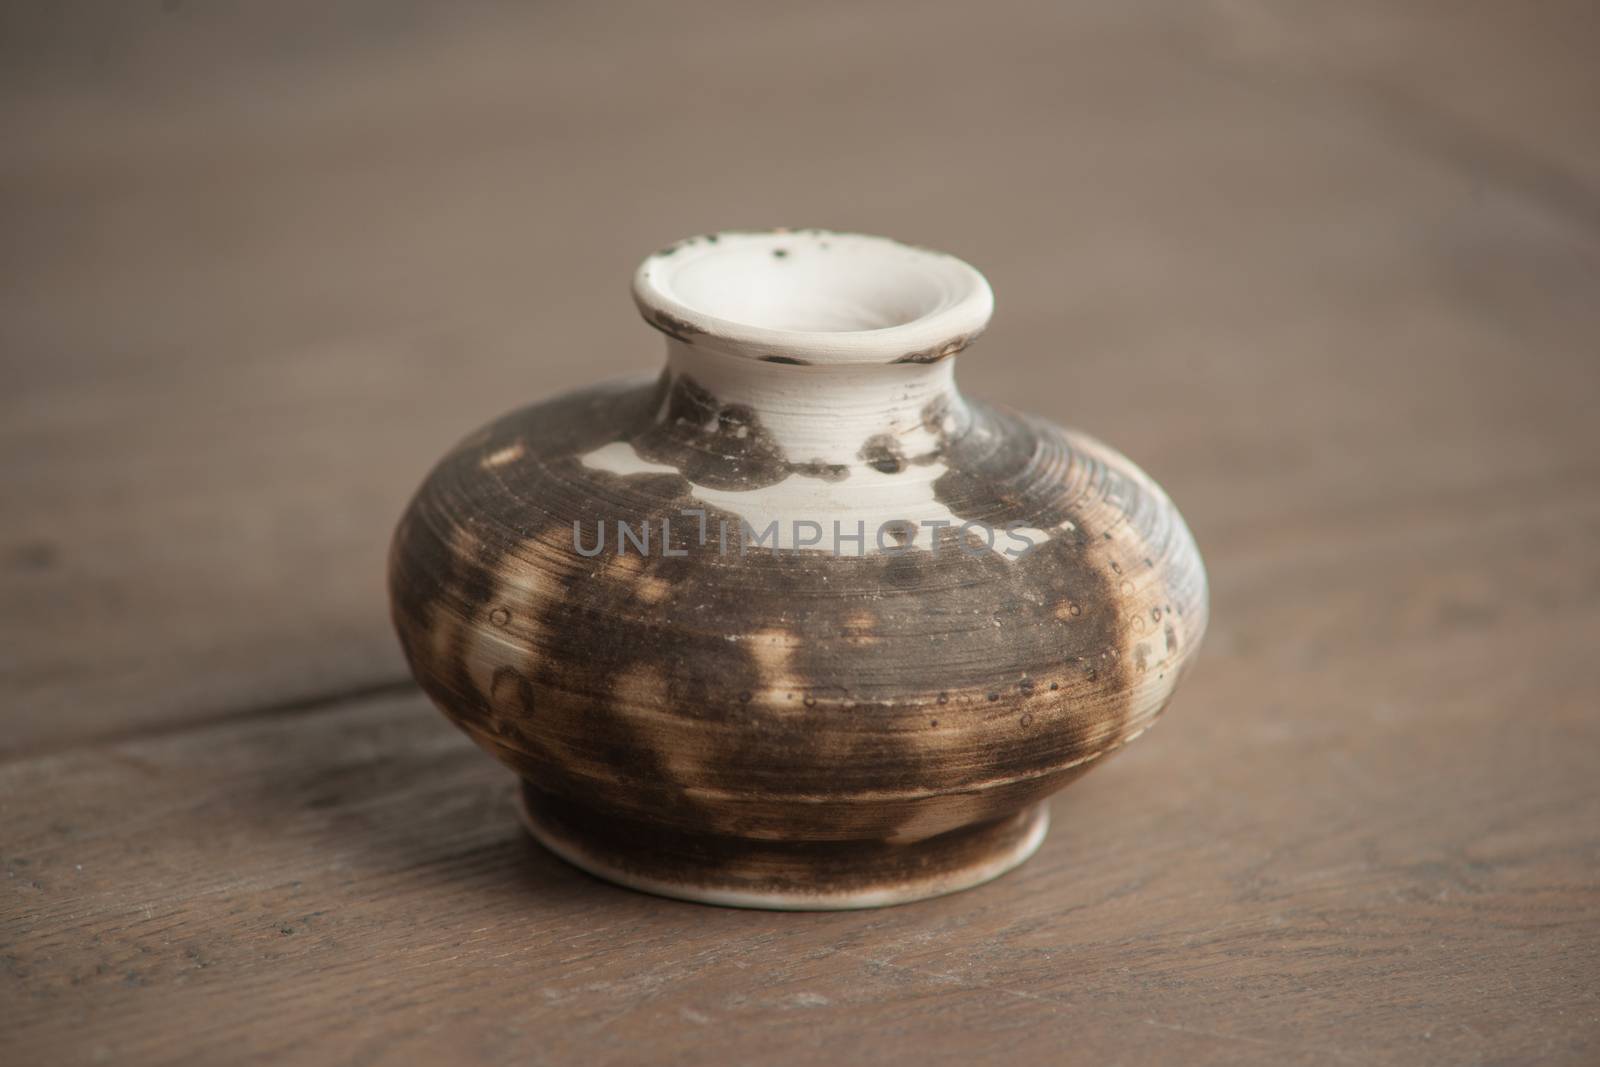 Traditional handcrafted vase of brown color on the table